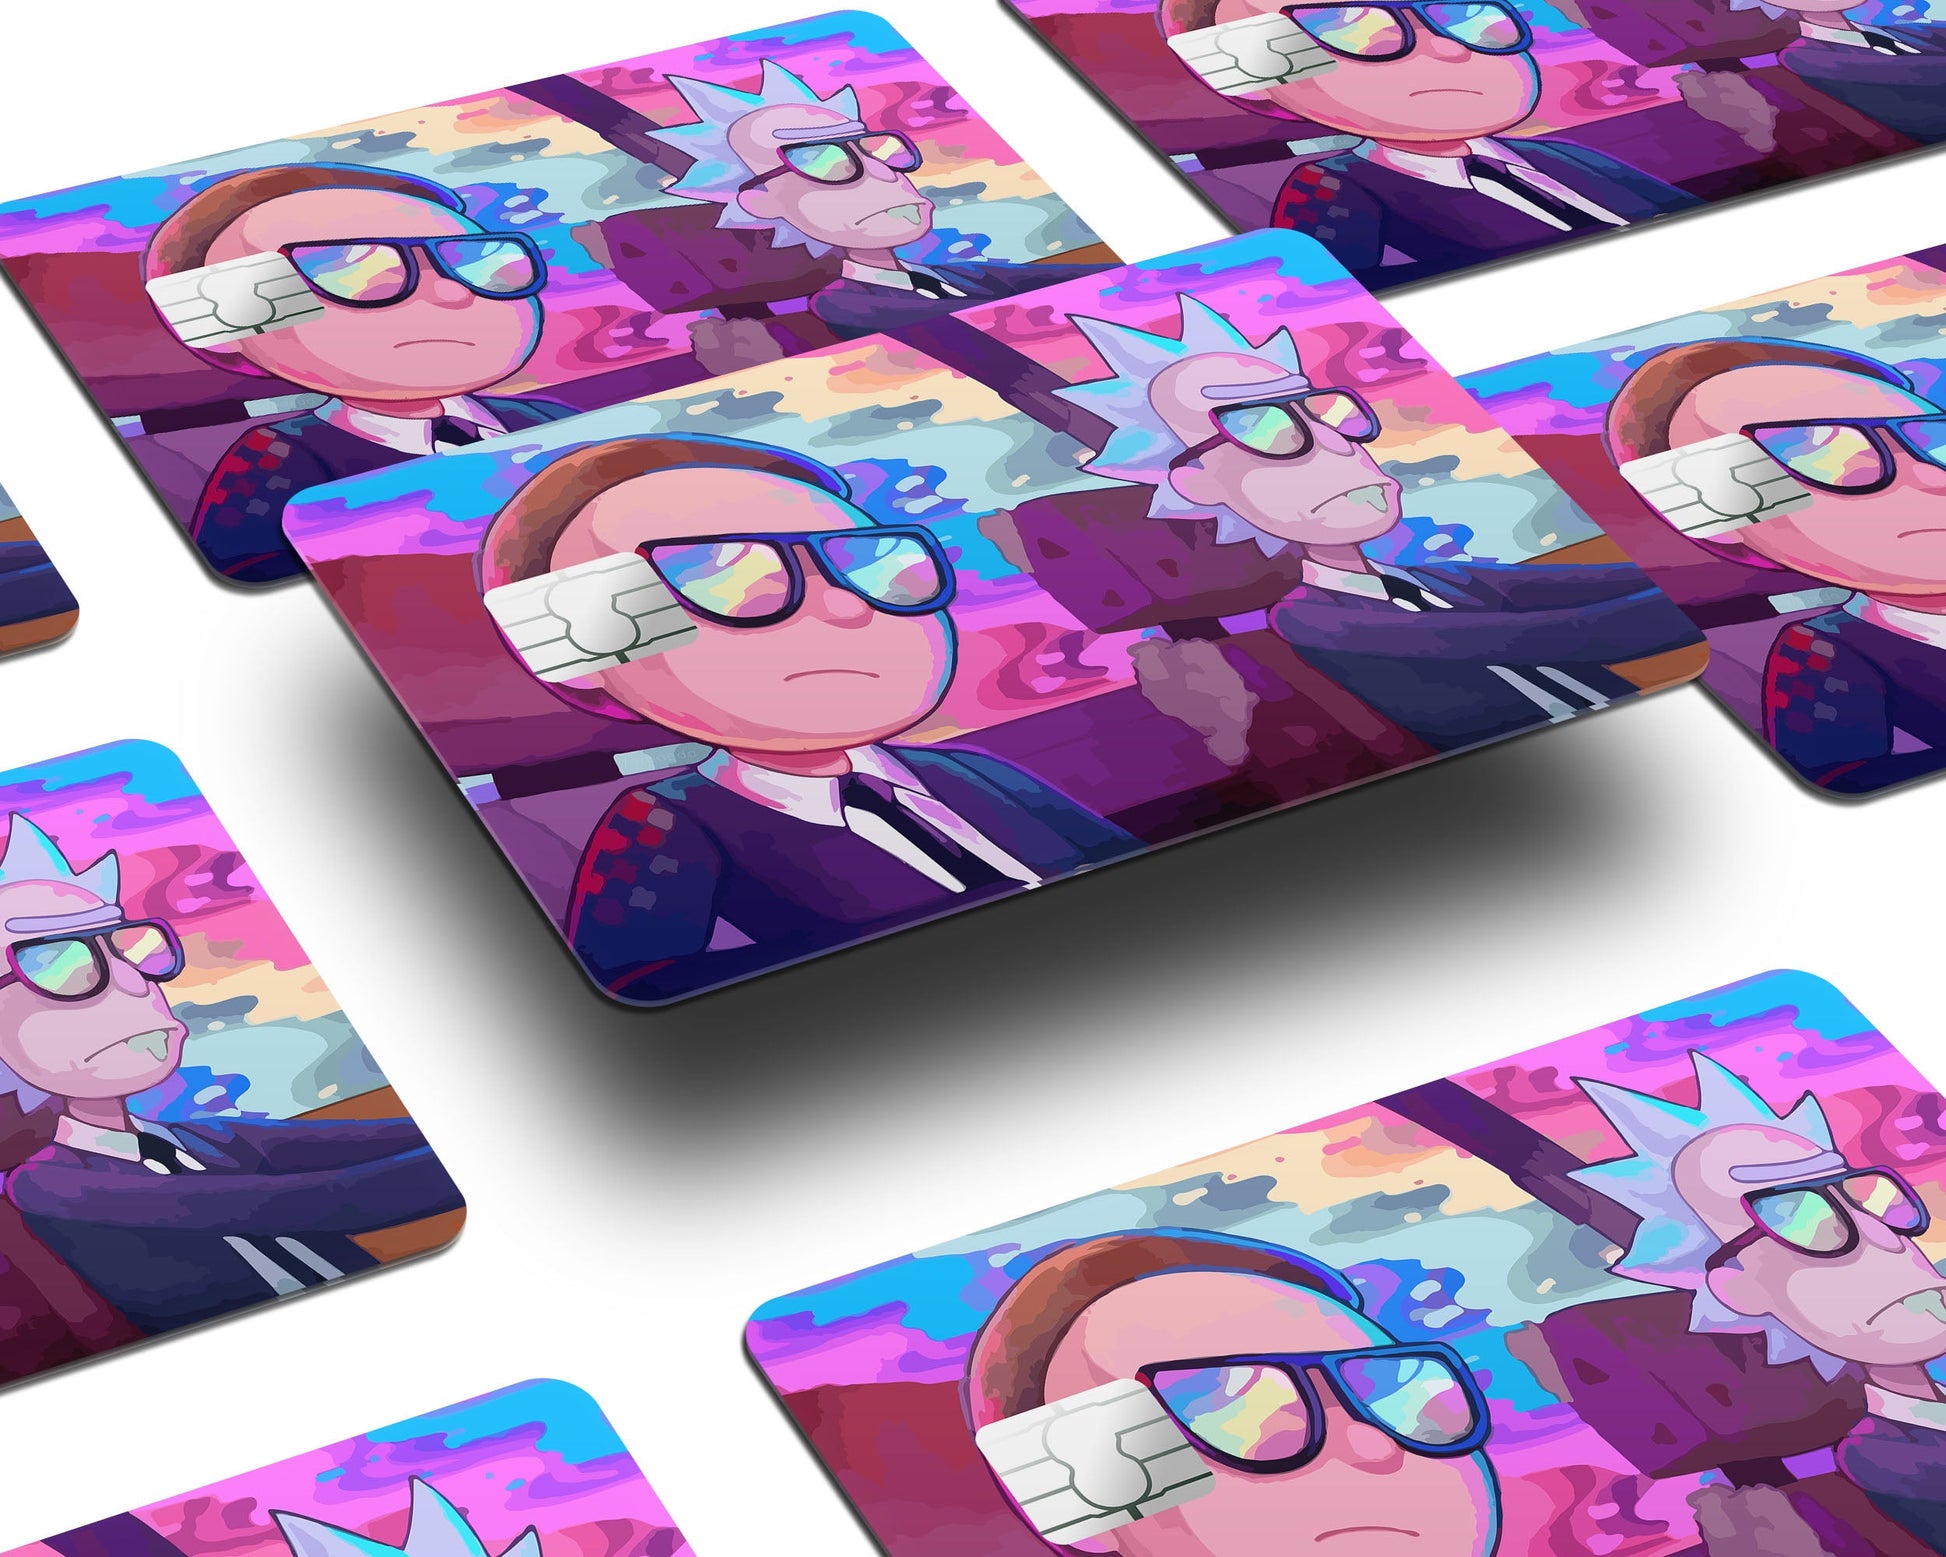 Anime Town Creations Credit Card Agents Rick and Morty Window Skins - Anime Rick and Morty Credit Card Skin